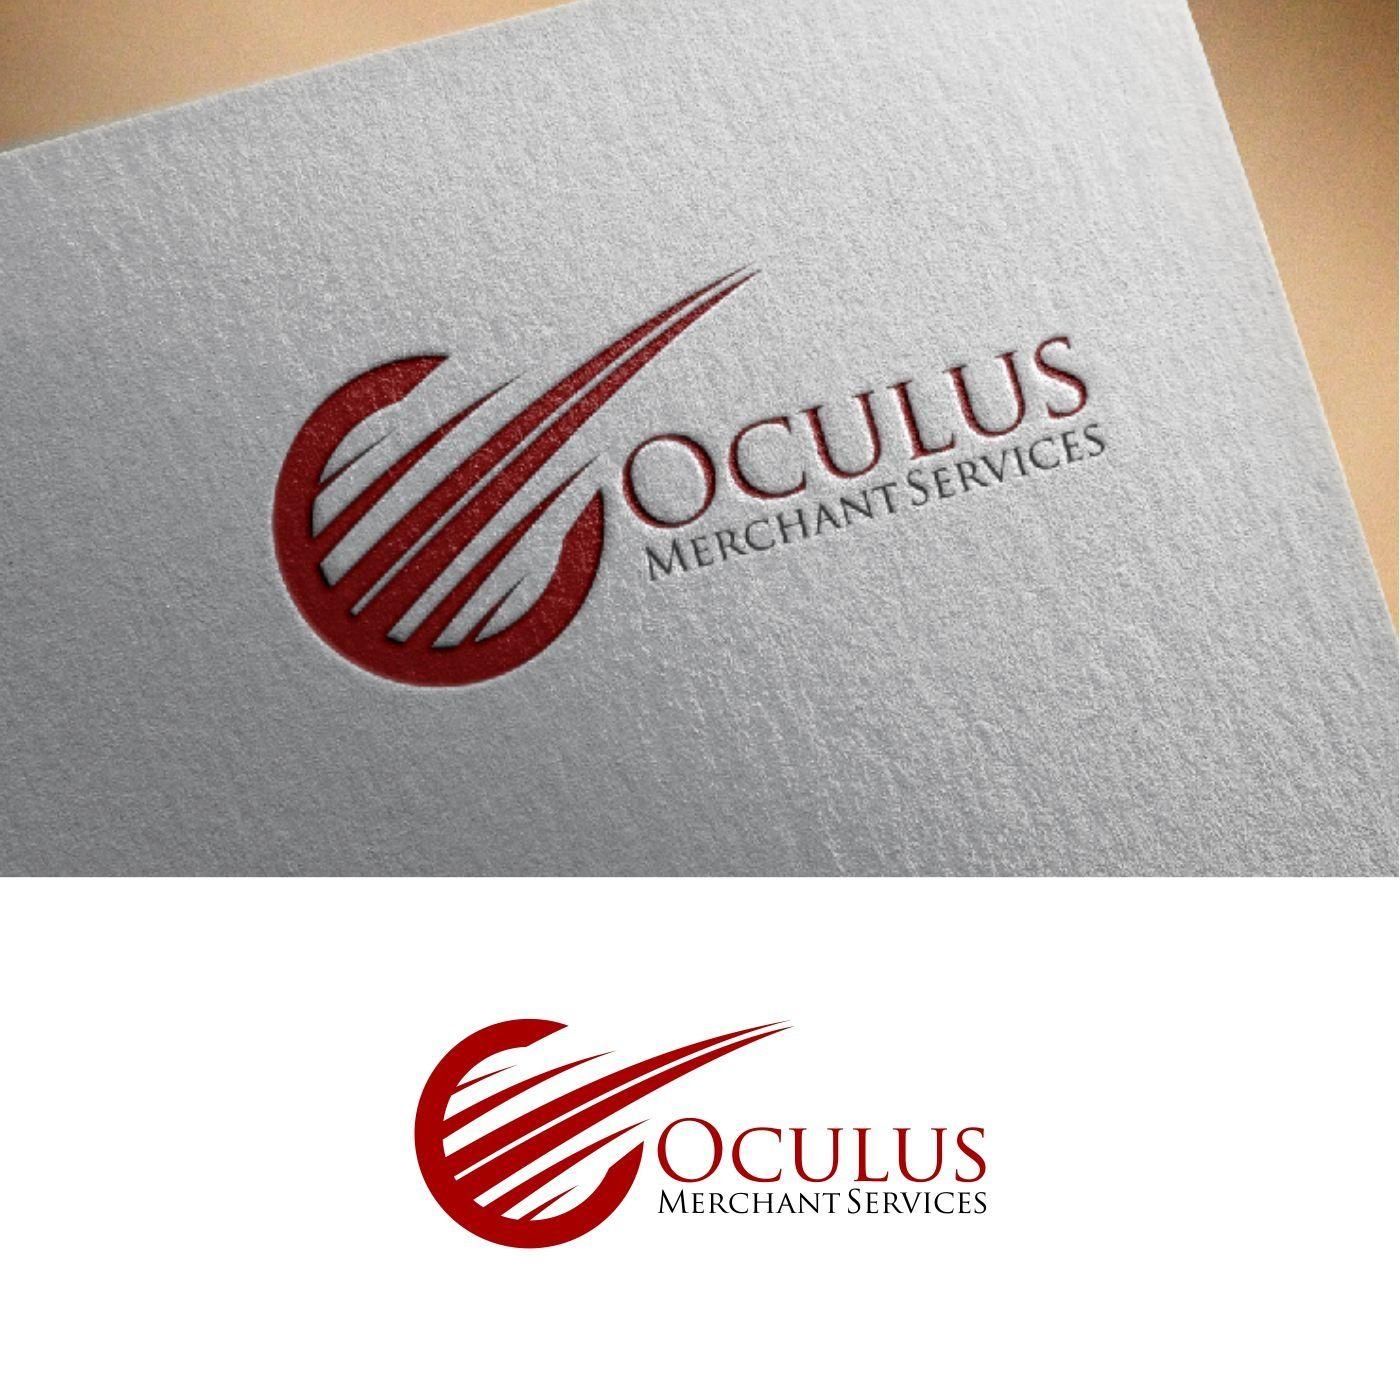 Generic Corporate Logo - It's even scary and overused logo designs sold